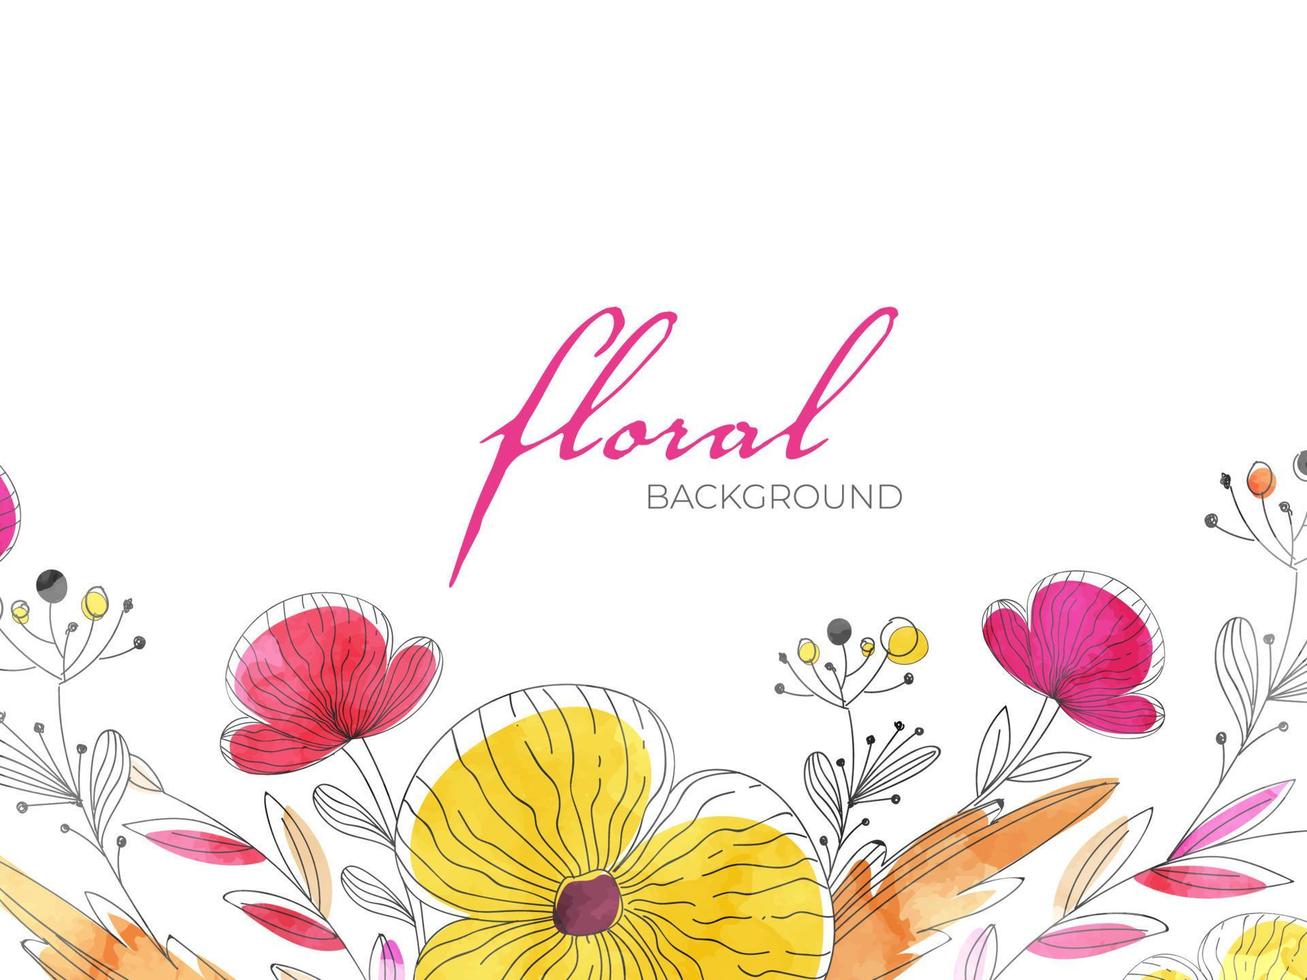 Floral Background Decorated with Doodle Style Poppy Flower and Leaves. vector